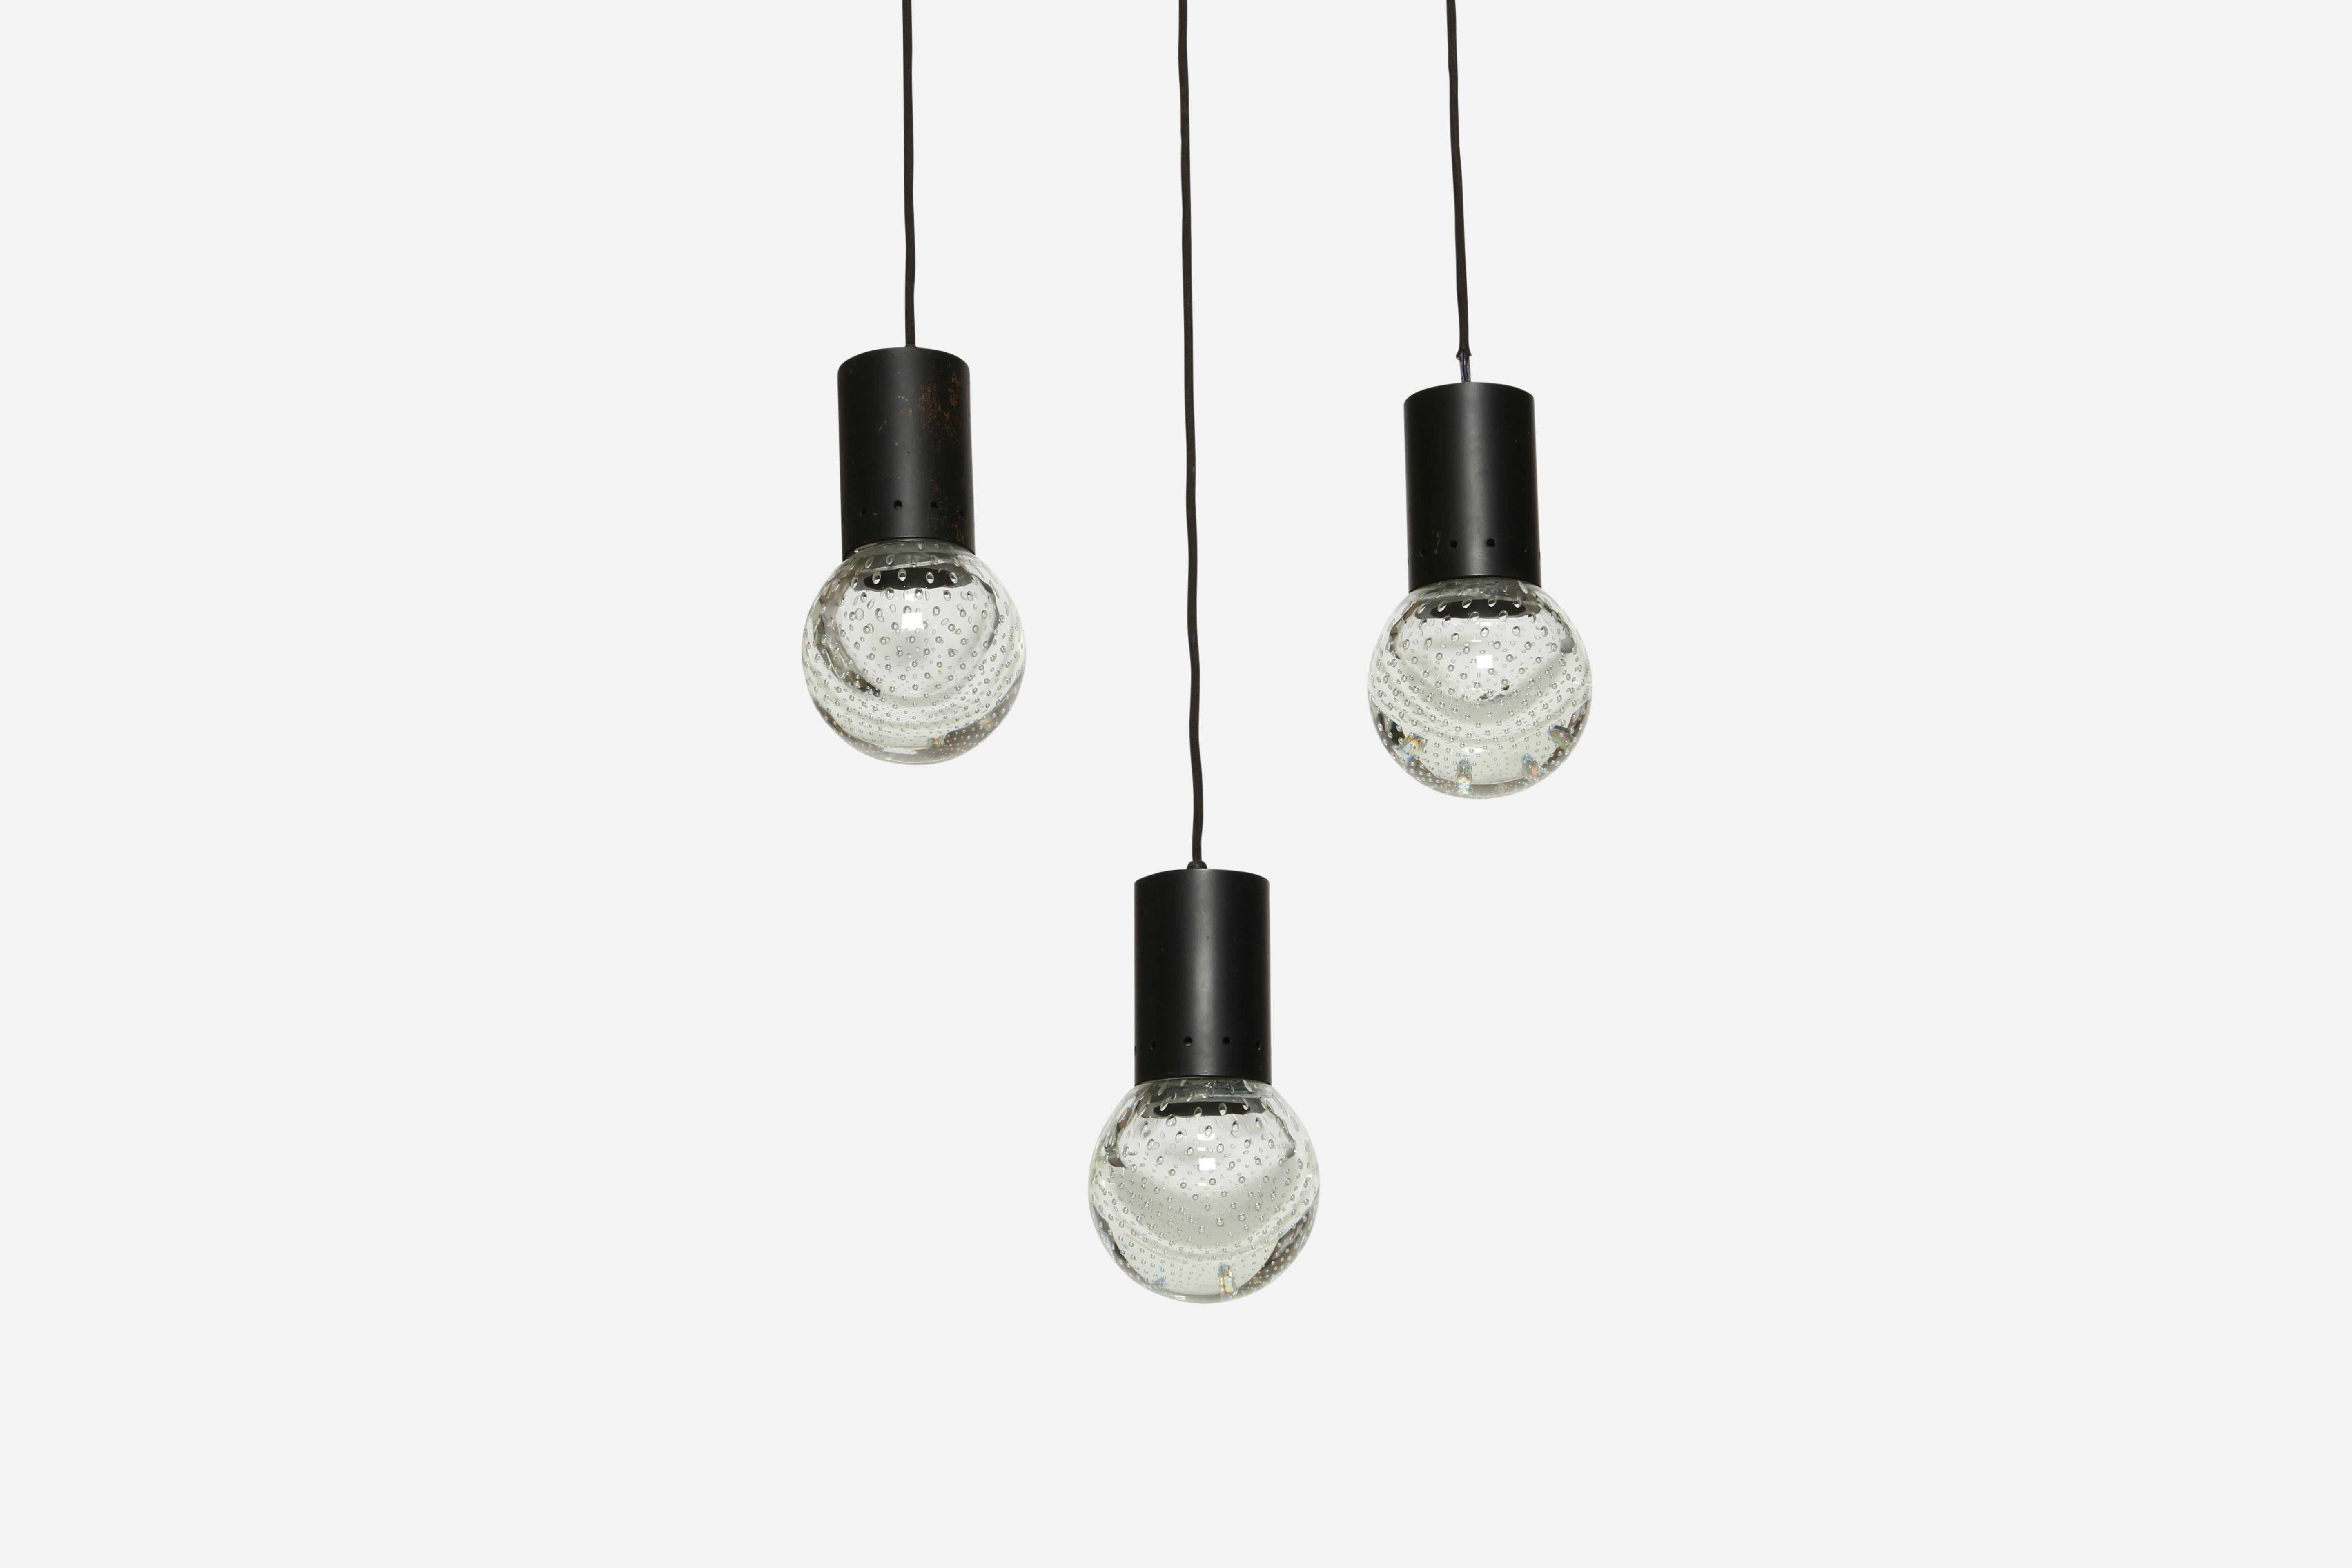 Gino Sarfatti pendants for Archimede Seguso.
Designed and manufactured in Italy in 1960s
Seguso bullicante glass and enameled metal frames.
Take one candelabra bulb each
Complimentary US rewiring with a custom plate upon request
Height